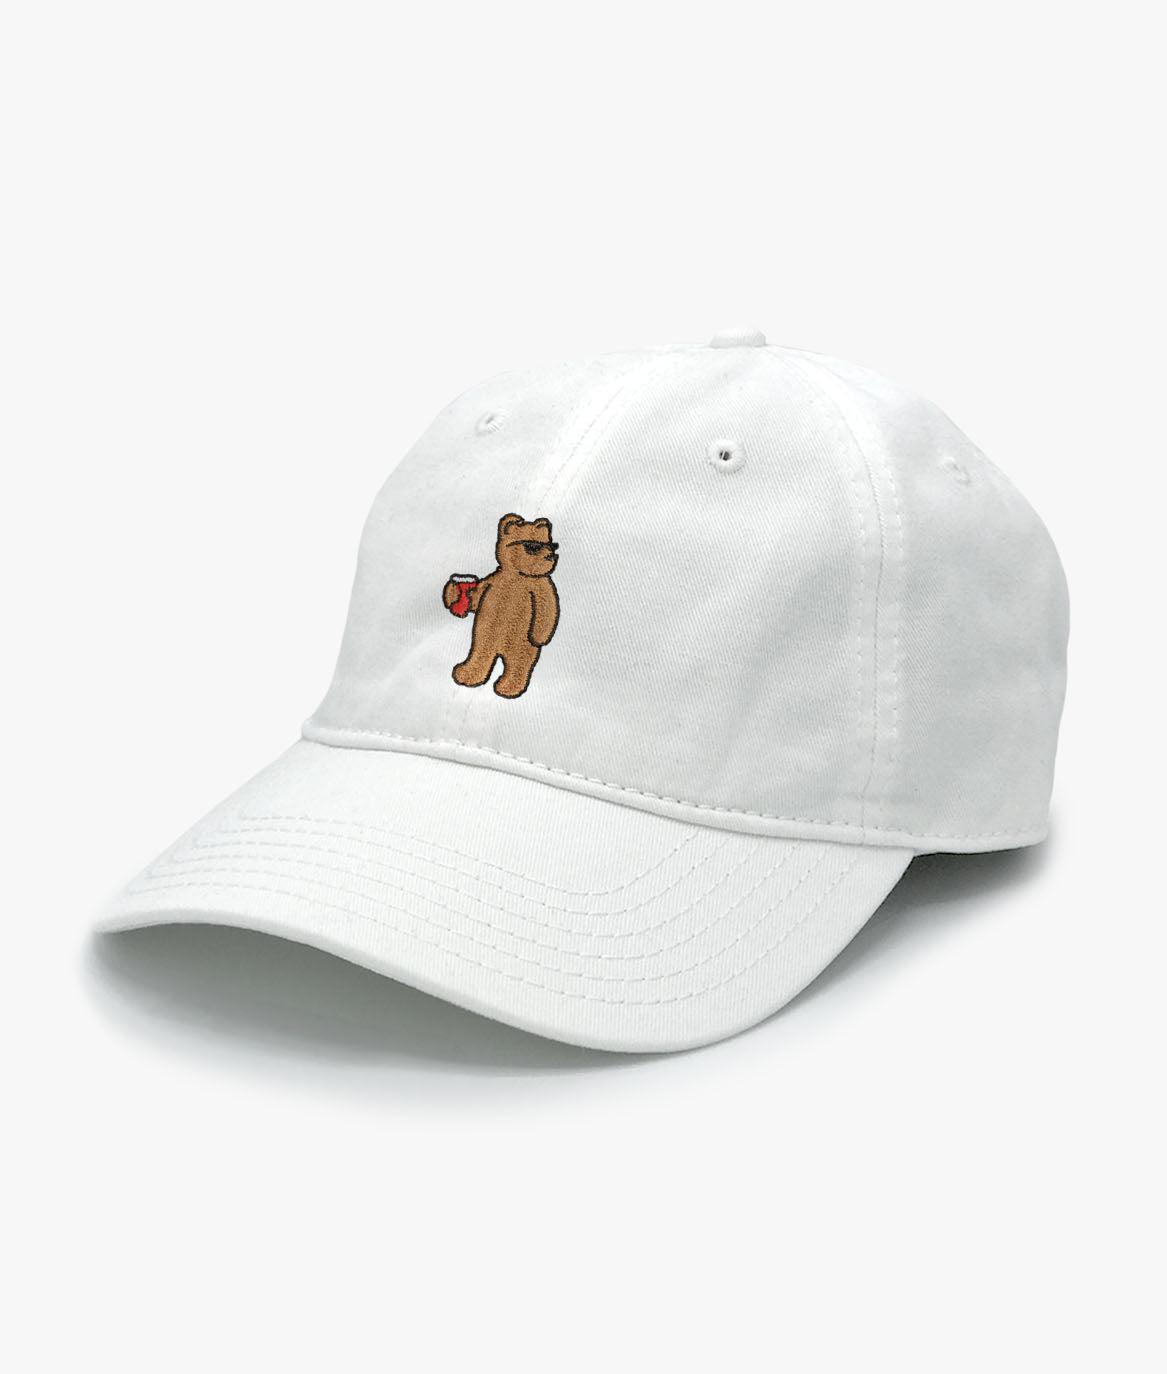 Familiar embroidered bears cap - White